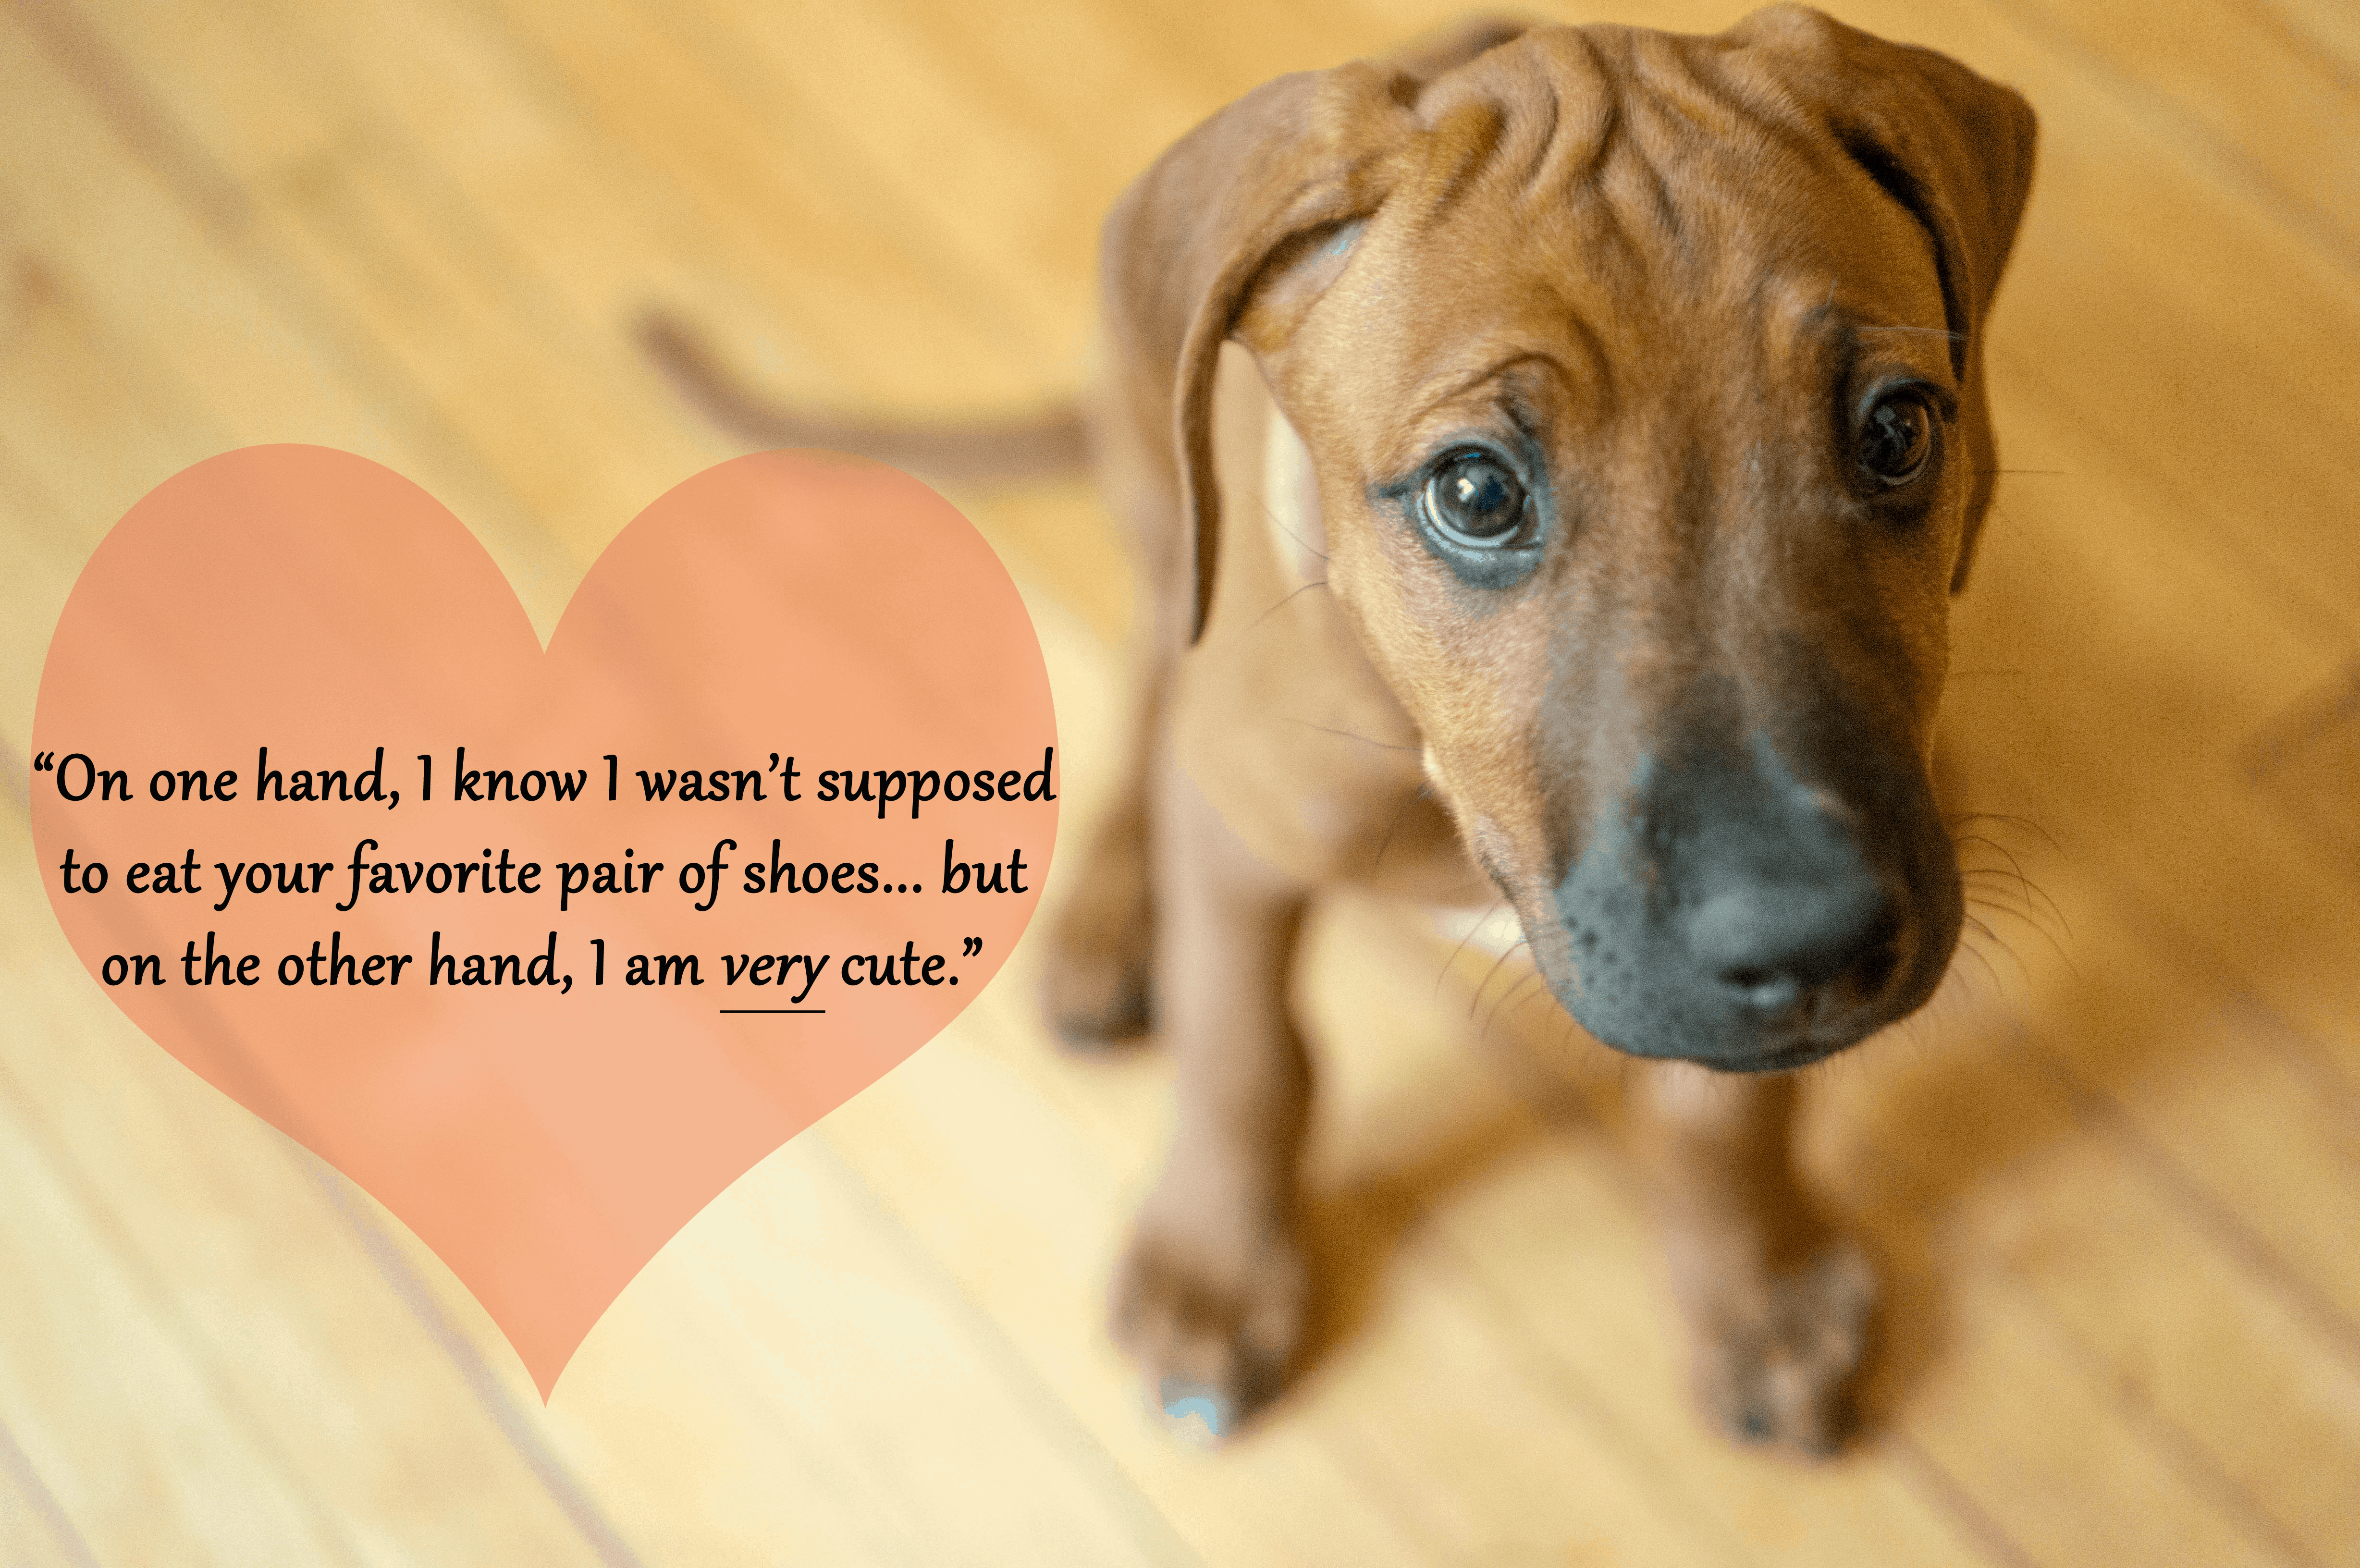 Rhodesian Ridgeback, puppy, funny, marking our territory, adventure, blog, dogs